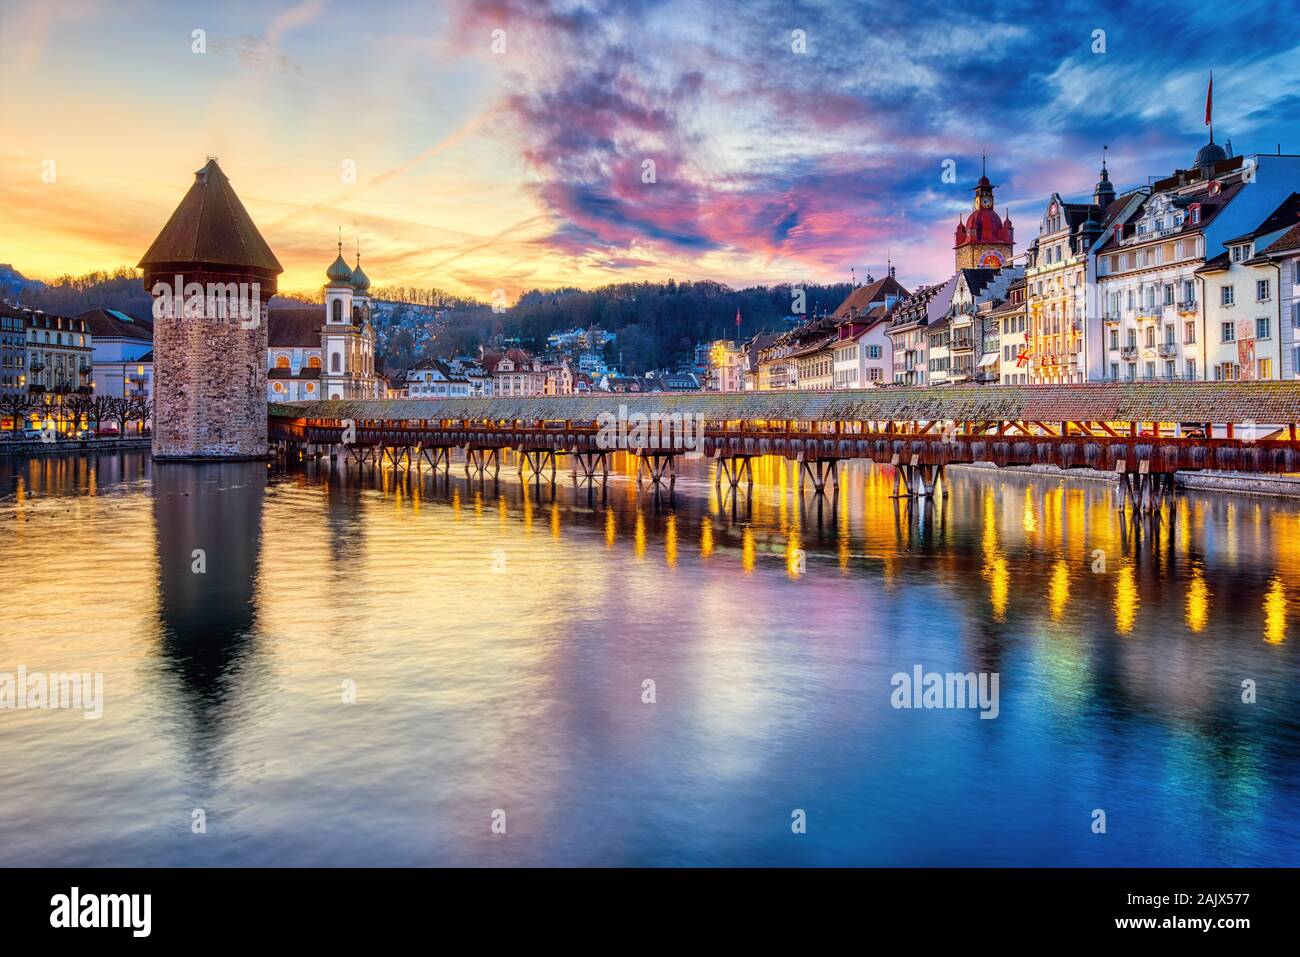 Historical Old town of Lucerne, Switzerland, in dramatic sunset light Stock Photo